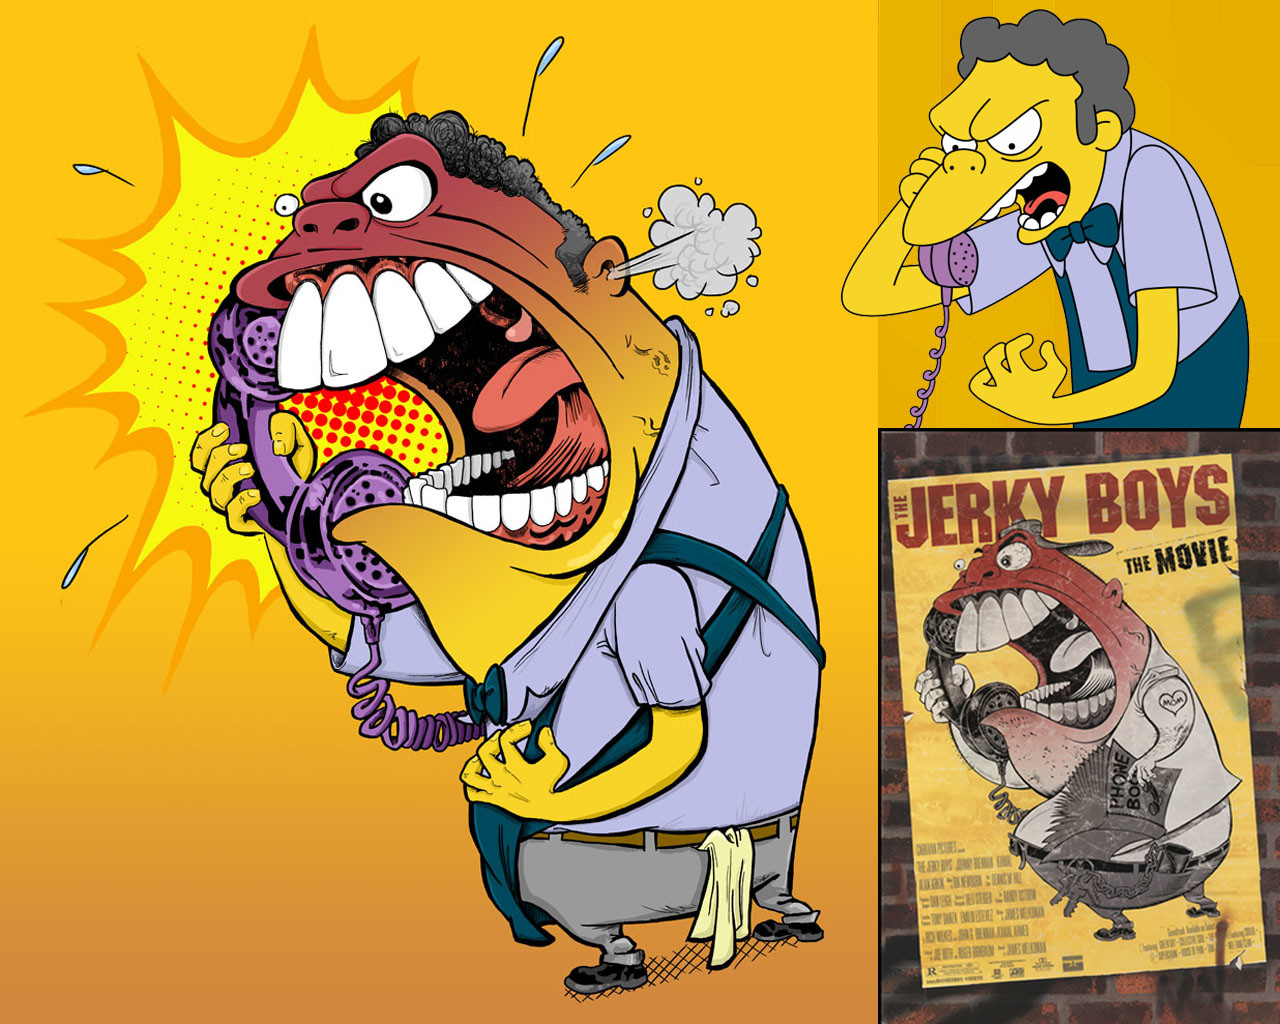 Jerky Moe, with references